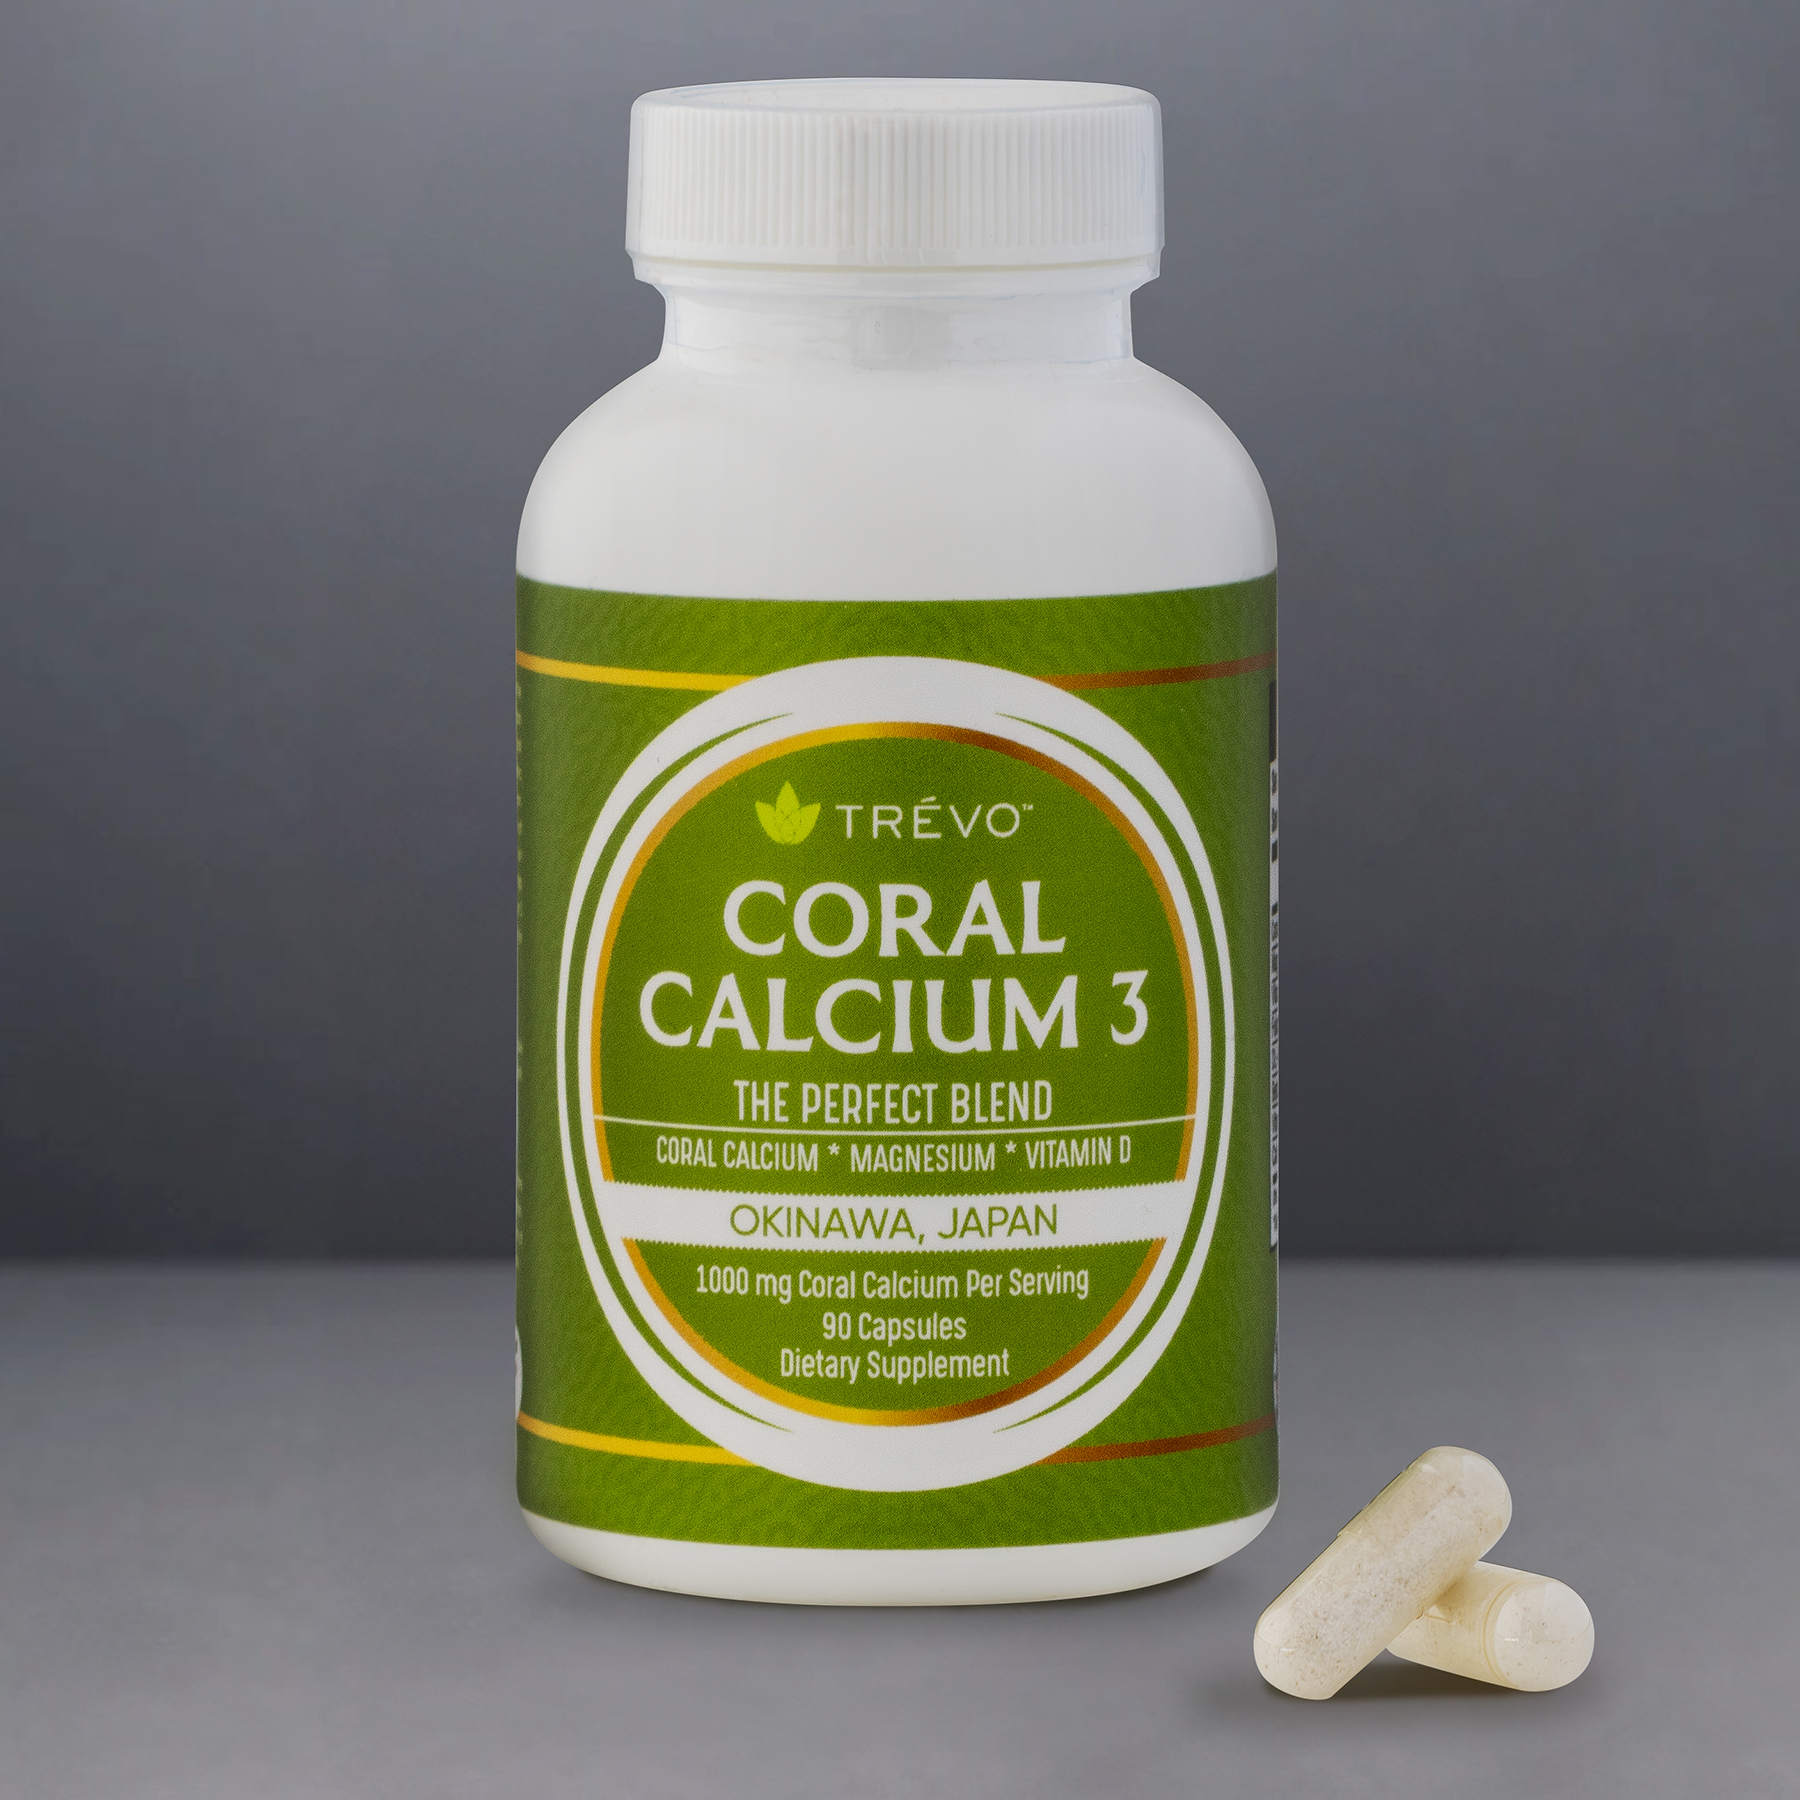 Coral Calcium 3 Supplements to Lower Cholesterol